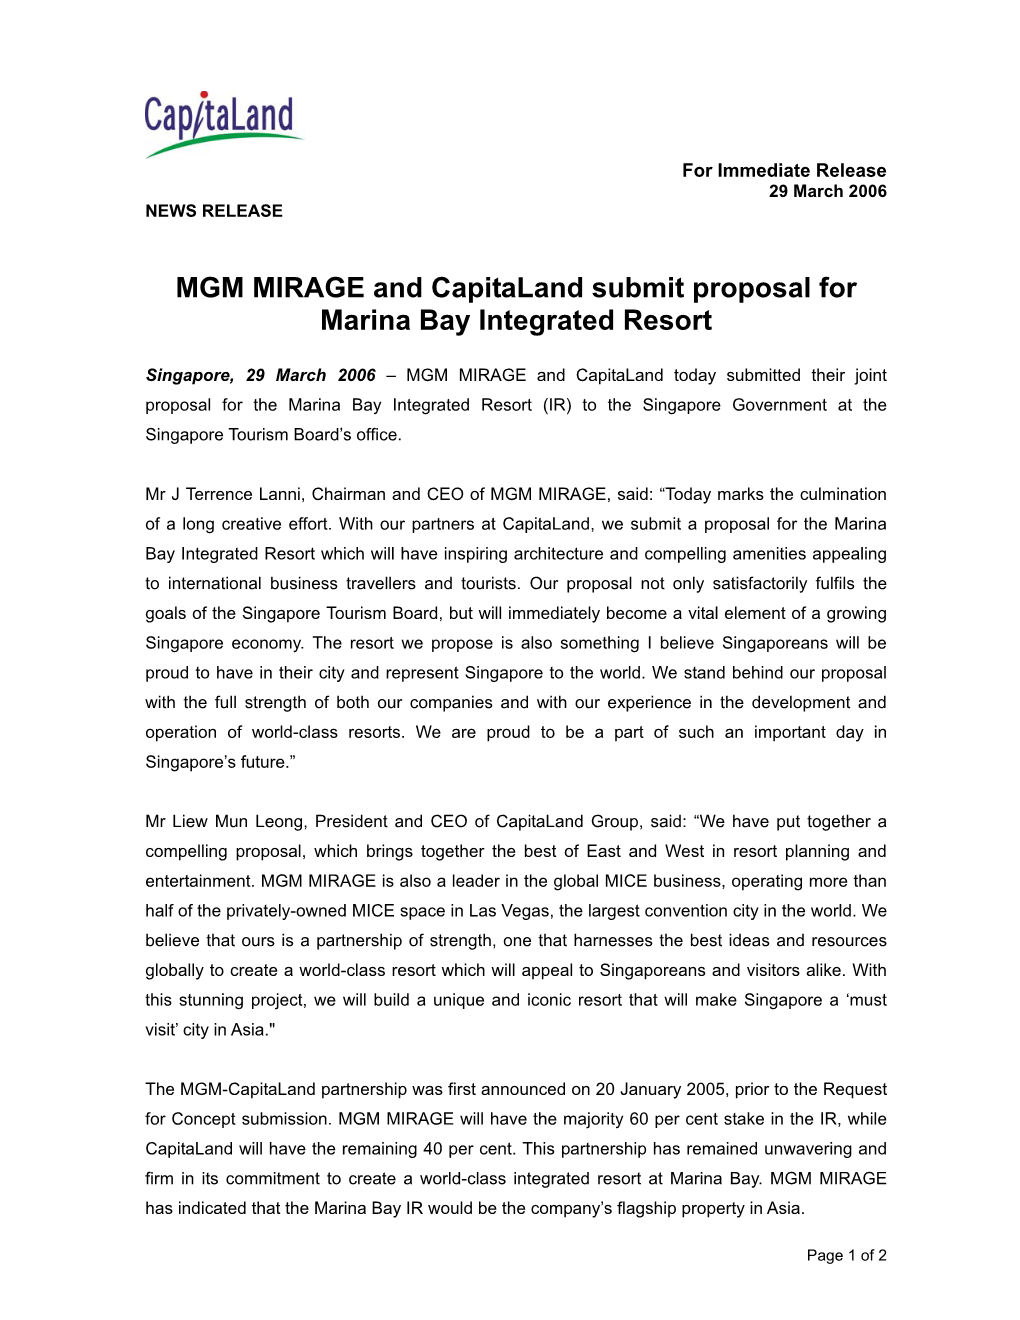 MGM MIRAGE and Capitaland Submit Proposal for Marina Bay Integrated Resort